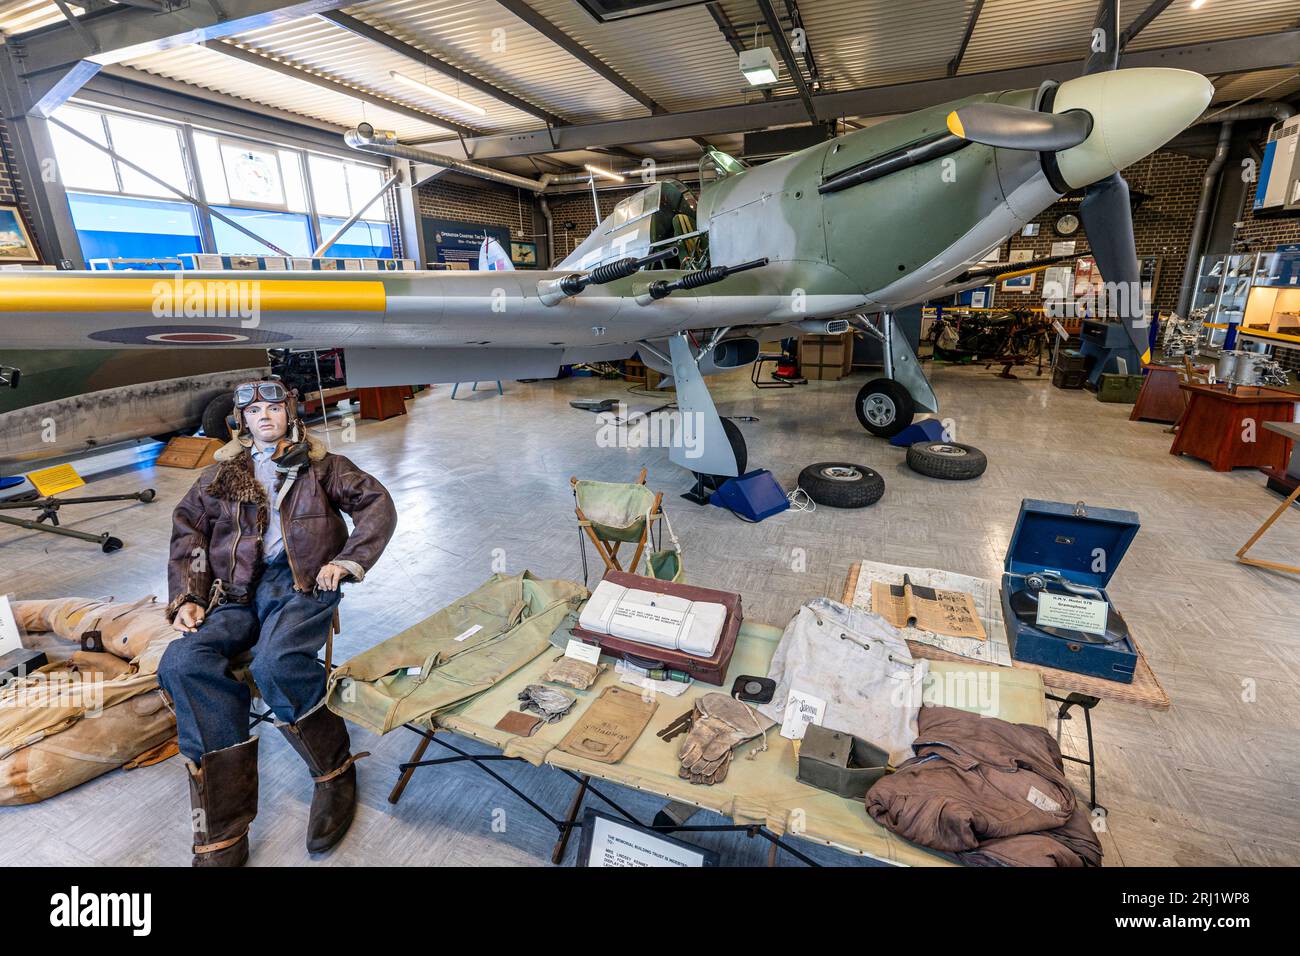 RAF Hurricane II on display inside the Spitfire and Hurricane museum at Manston in Kent. Low angle view of plane with pilot figure sitting outside. Stock Photo